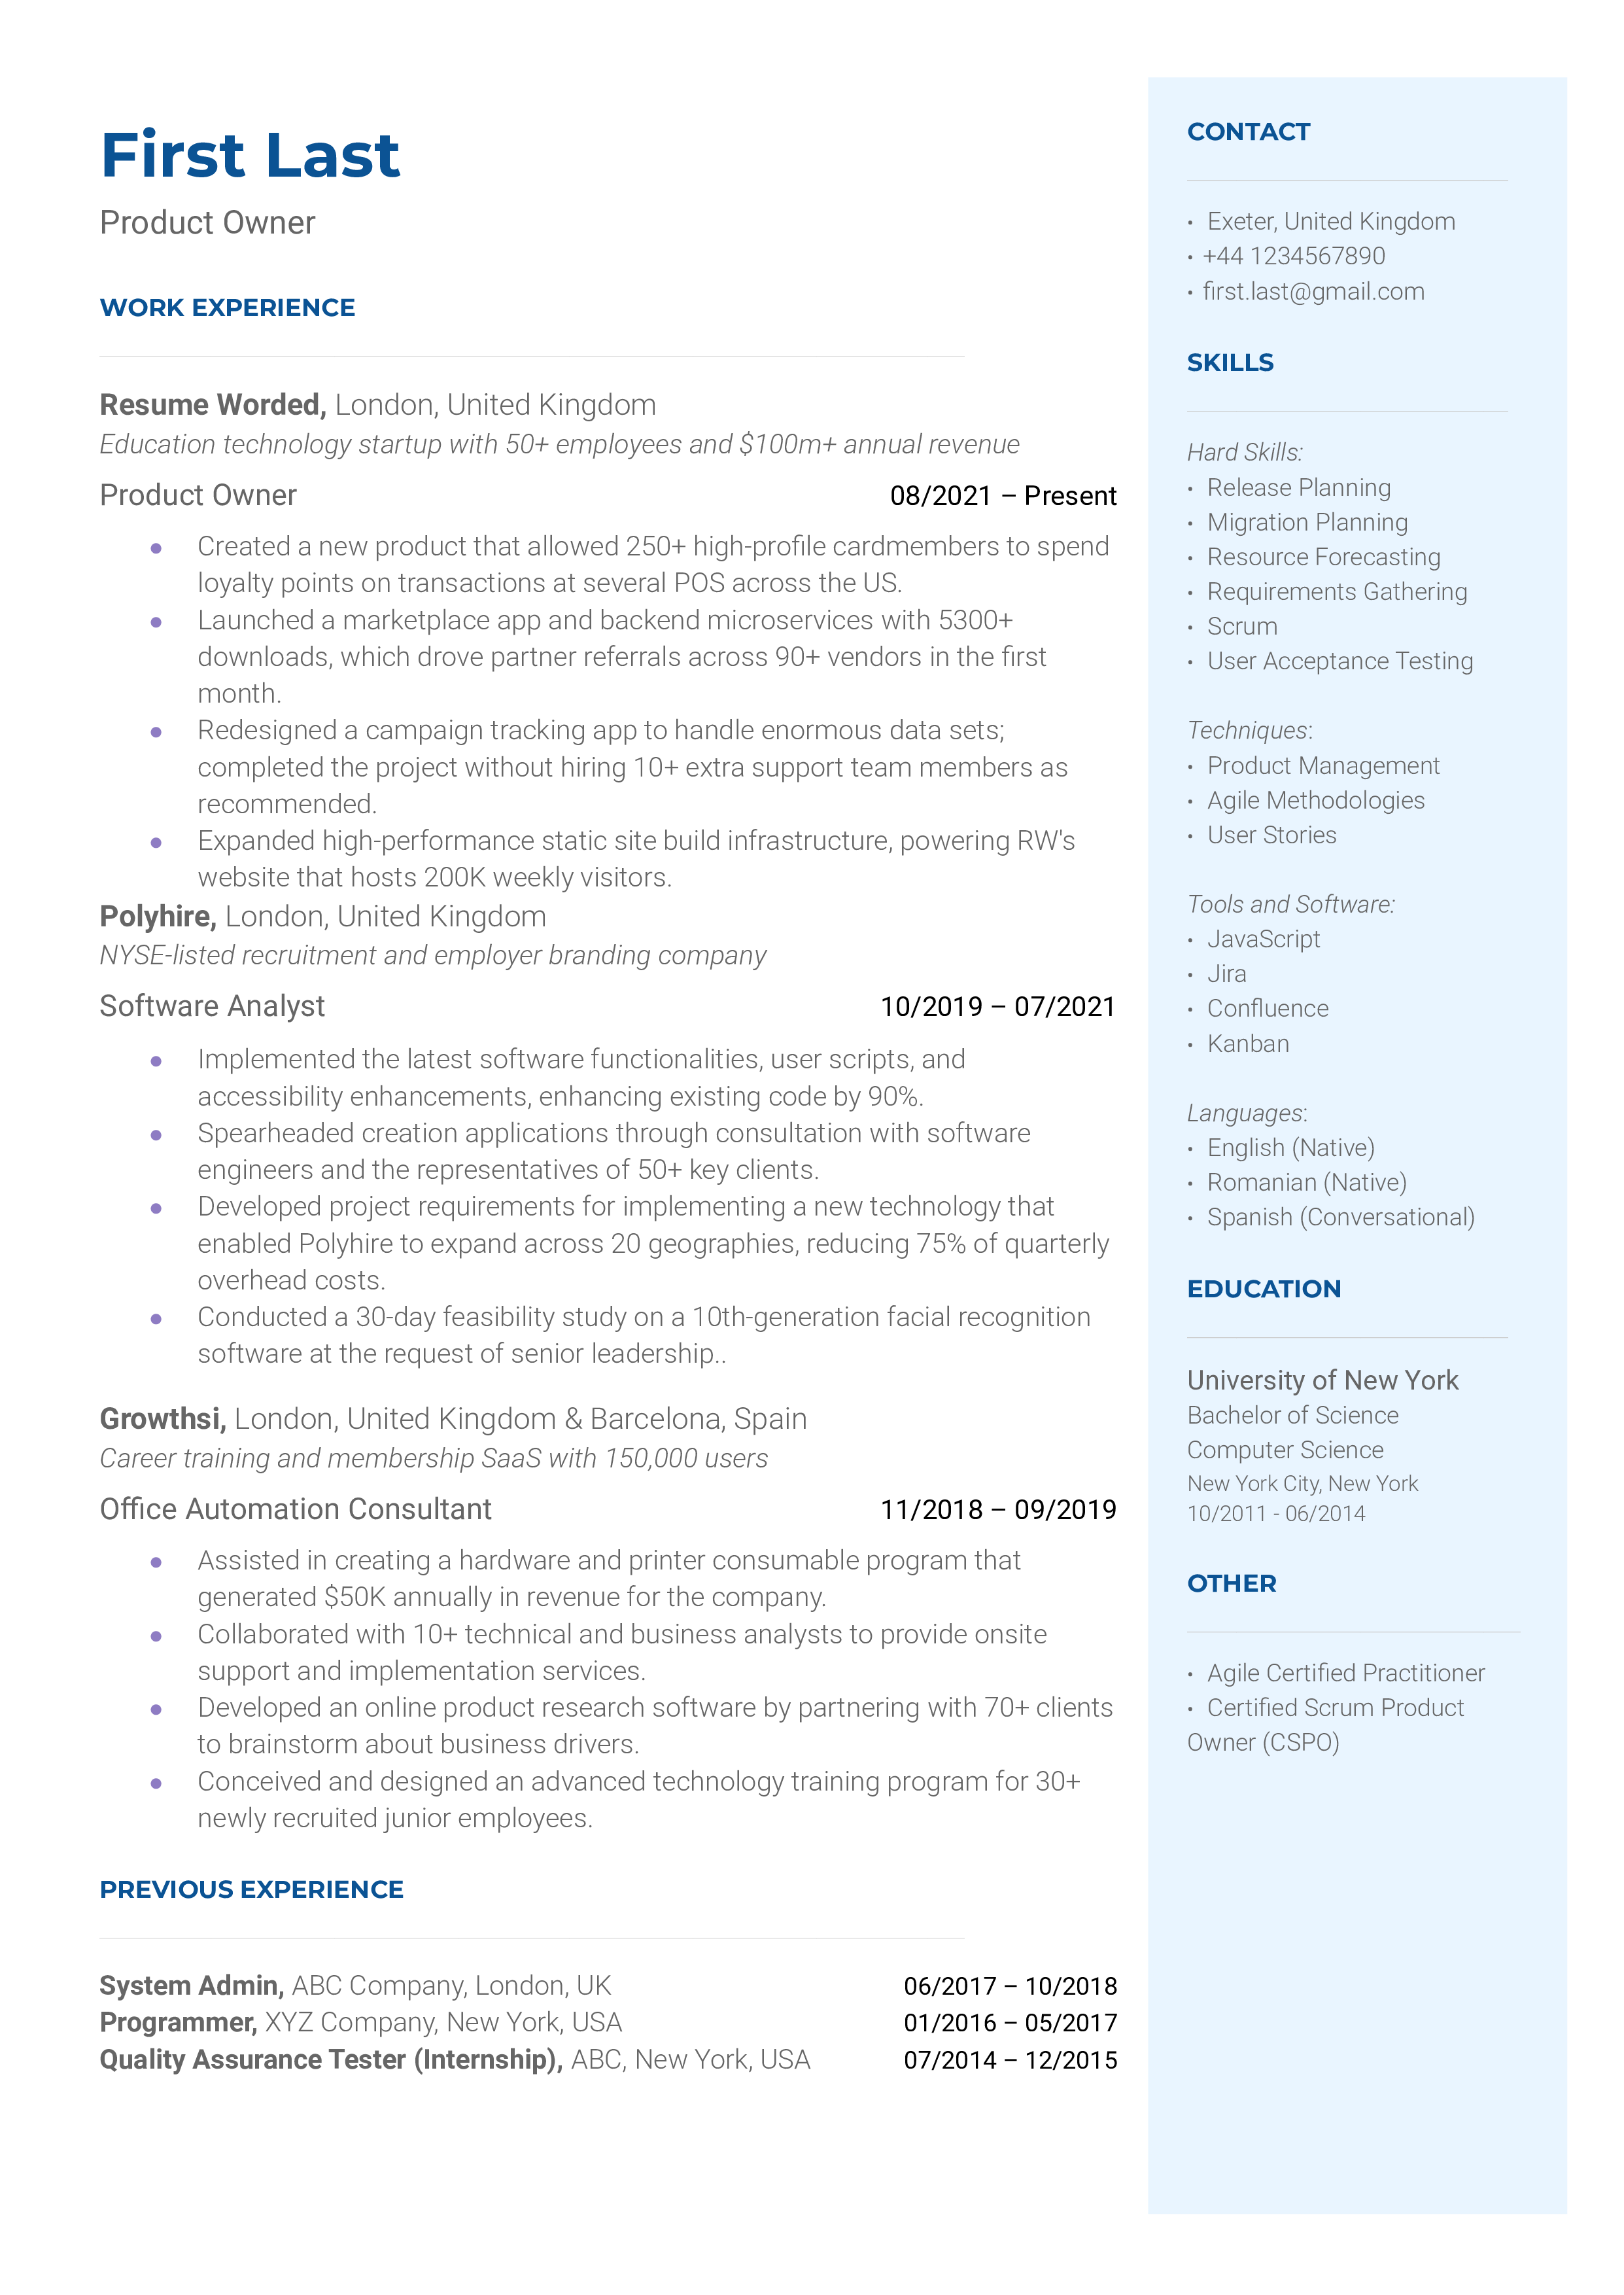 A product owner resume template highlighting scrum skills.